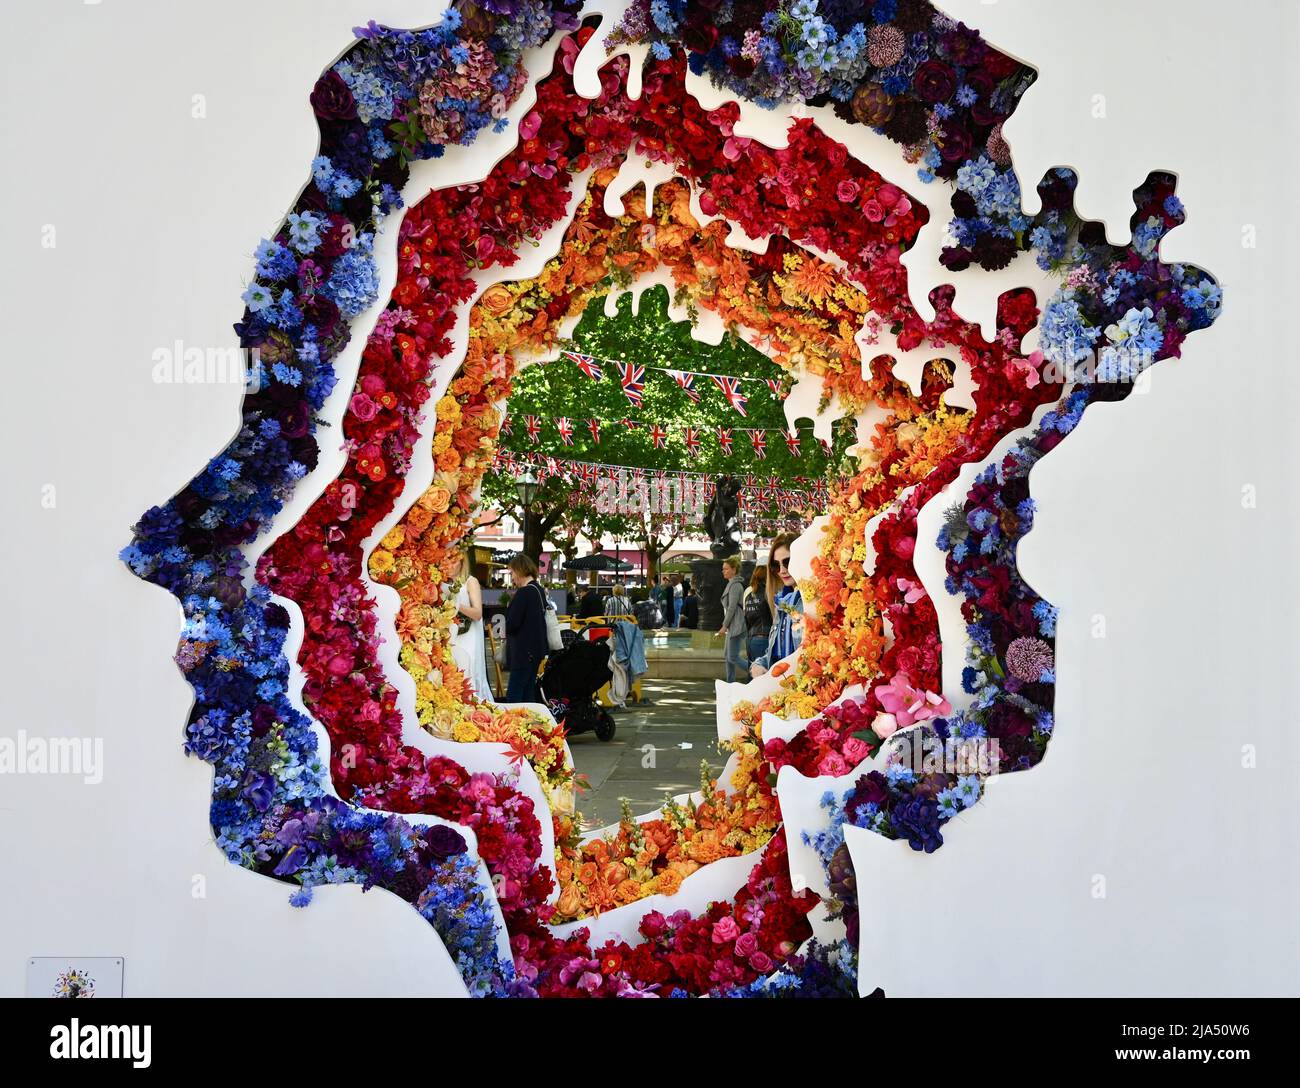 London, UK. 27th May 2022. The Queen's Head. Chelsea in Bloom, Chelsea's prestigous annual floral art show and London's largest free to attend festival of flowers. From 23-28th of May. The theme for 2022 was British Icons. Credit: michael melia/Alamy Live News Stock Photo